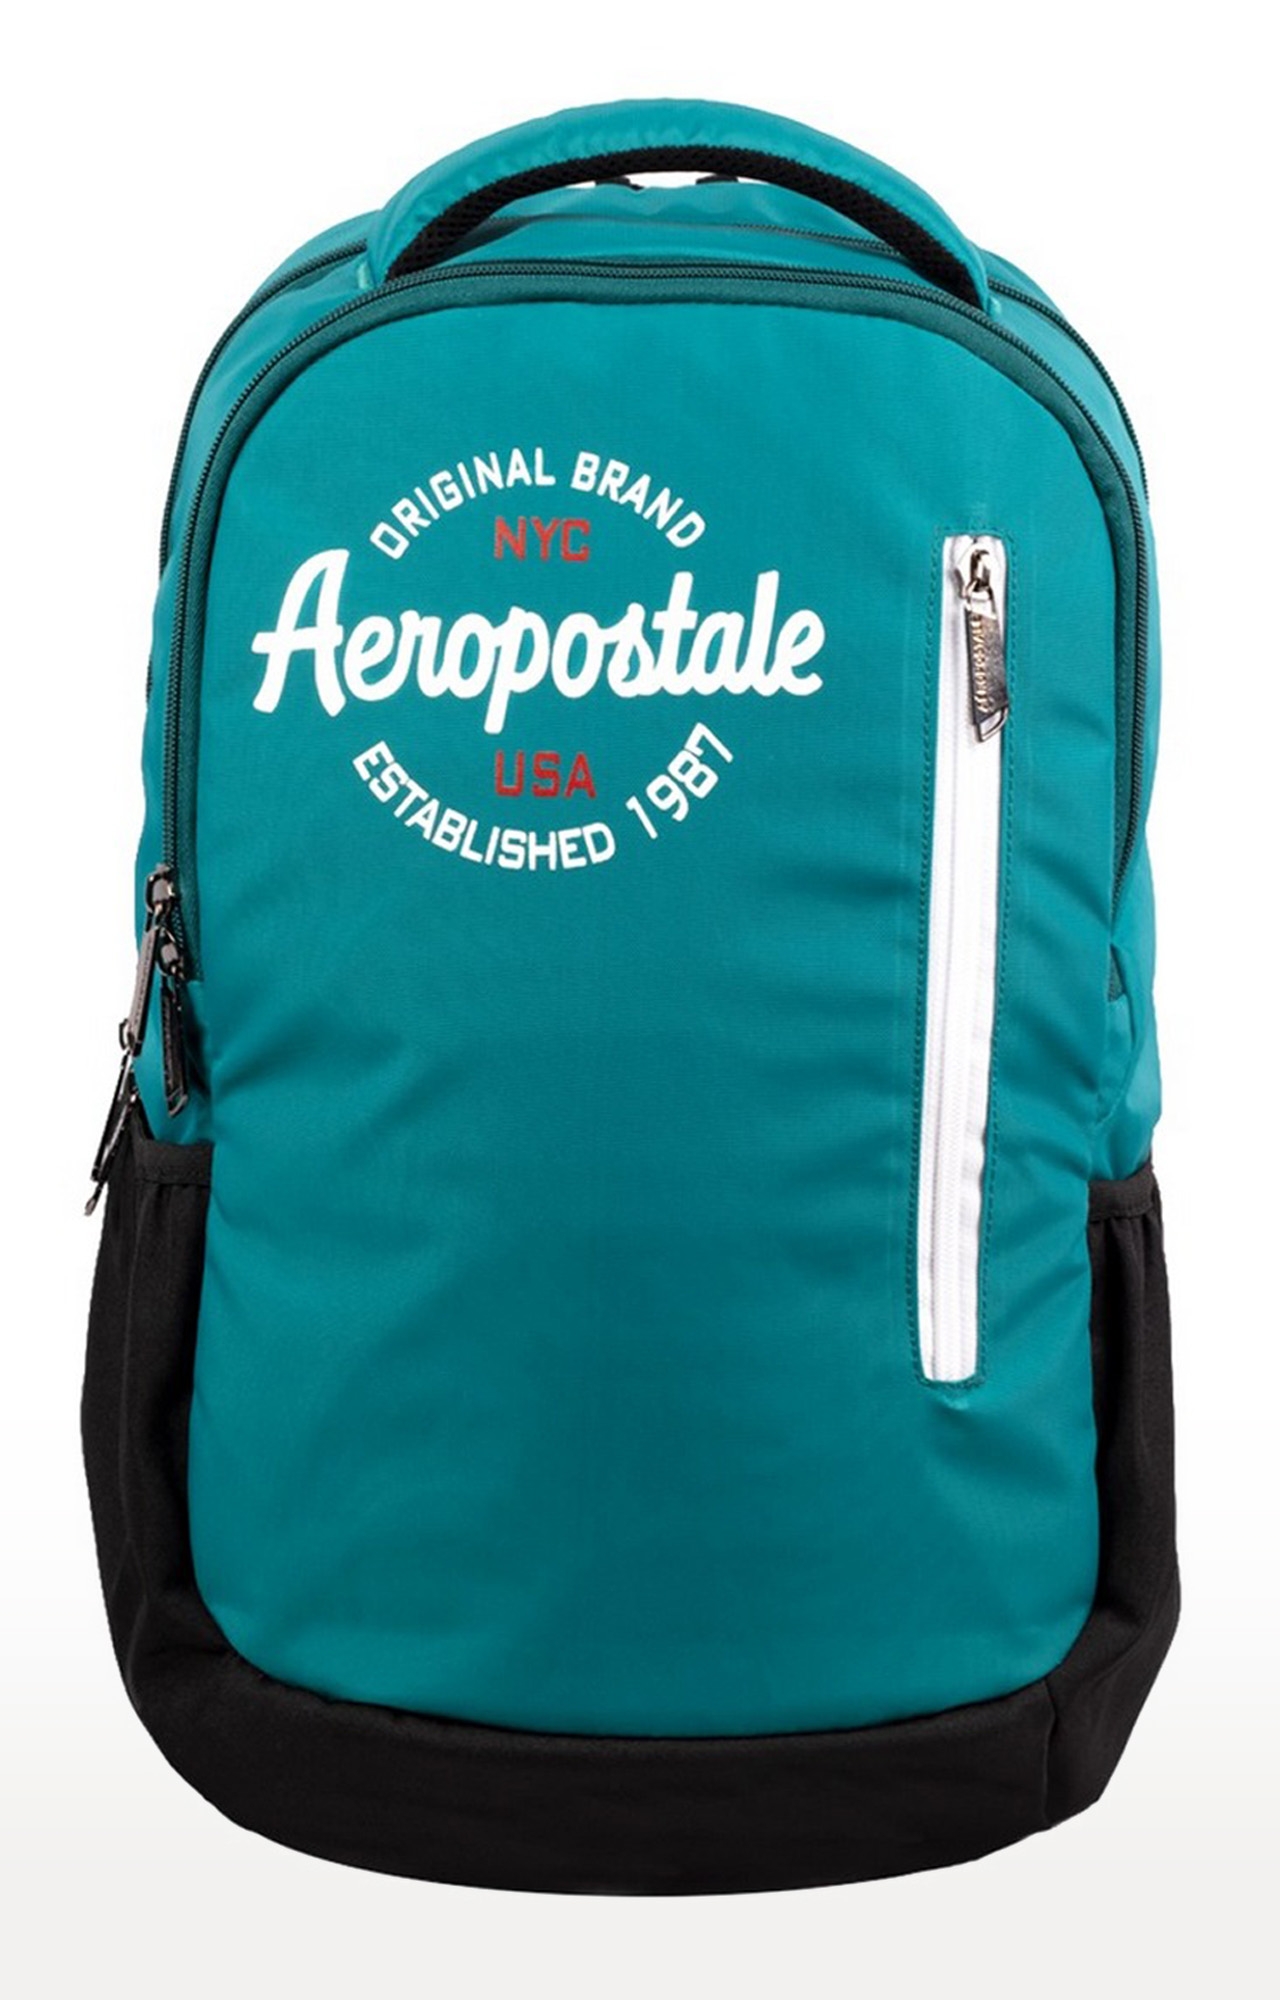 Aeropostale Backpack With 2 Main Compartment Laptop IPad Pocket